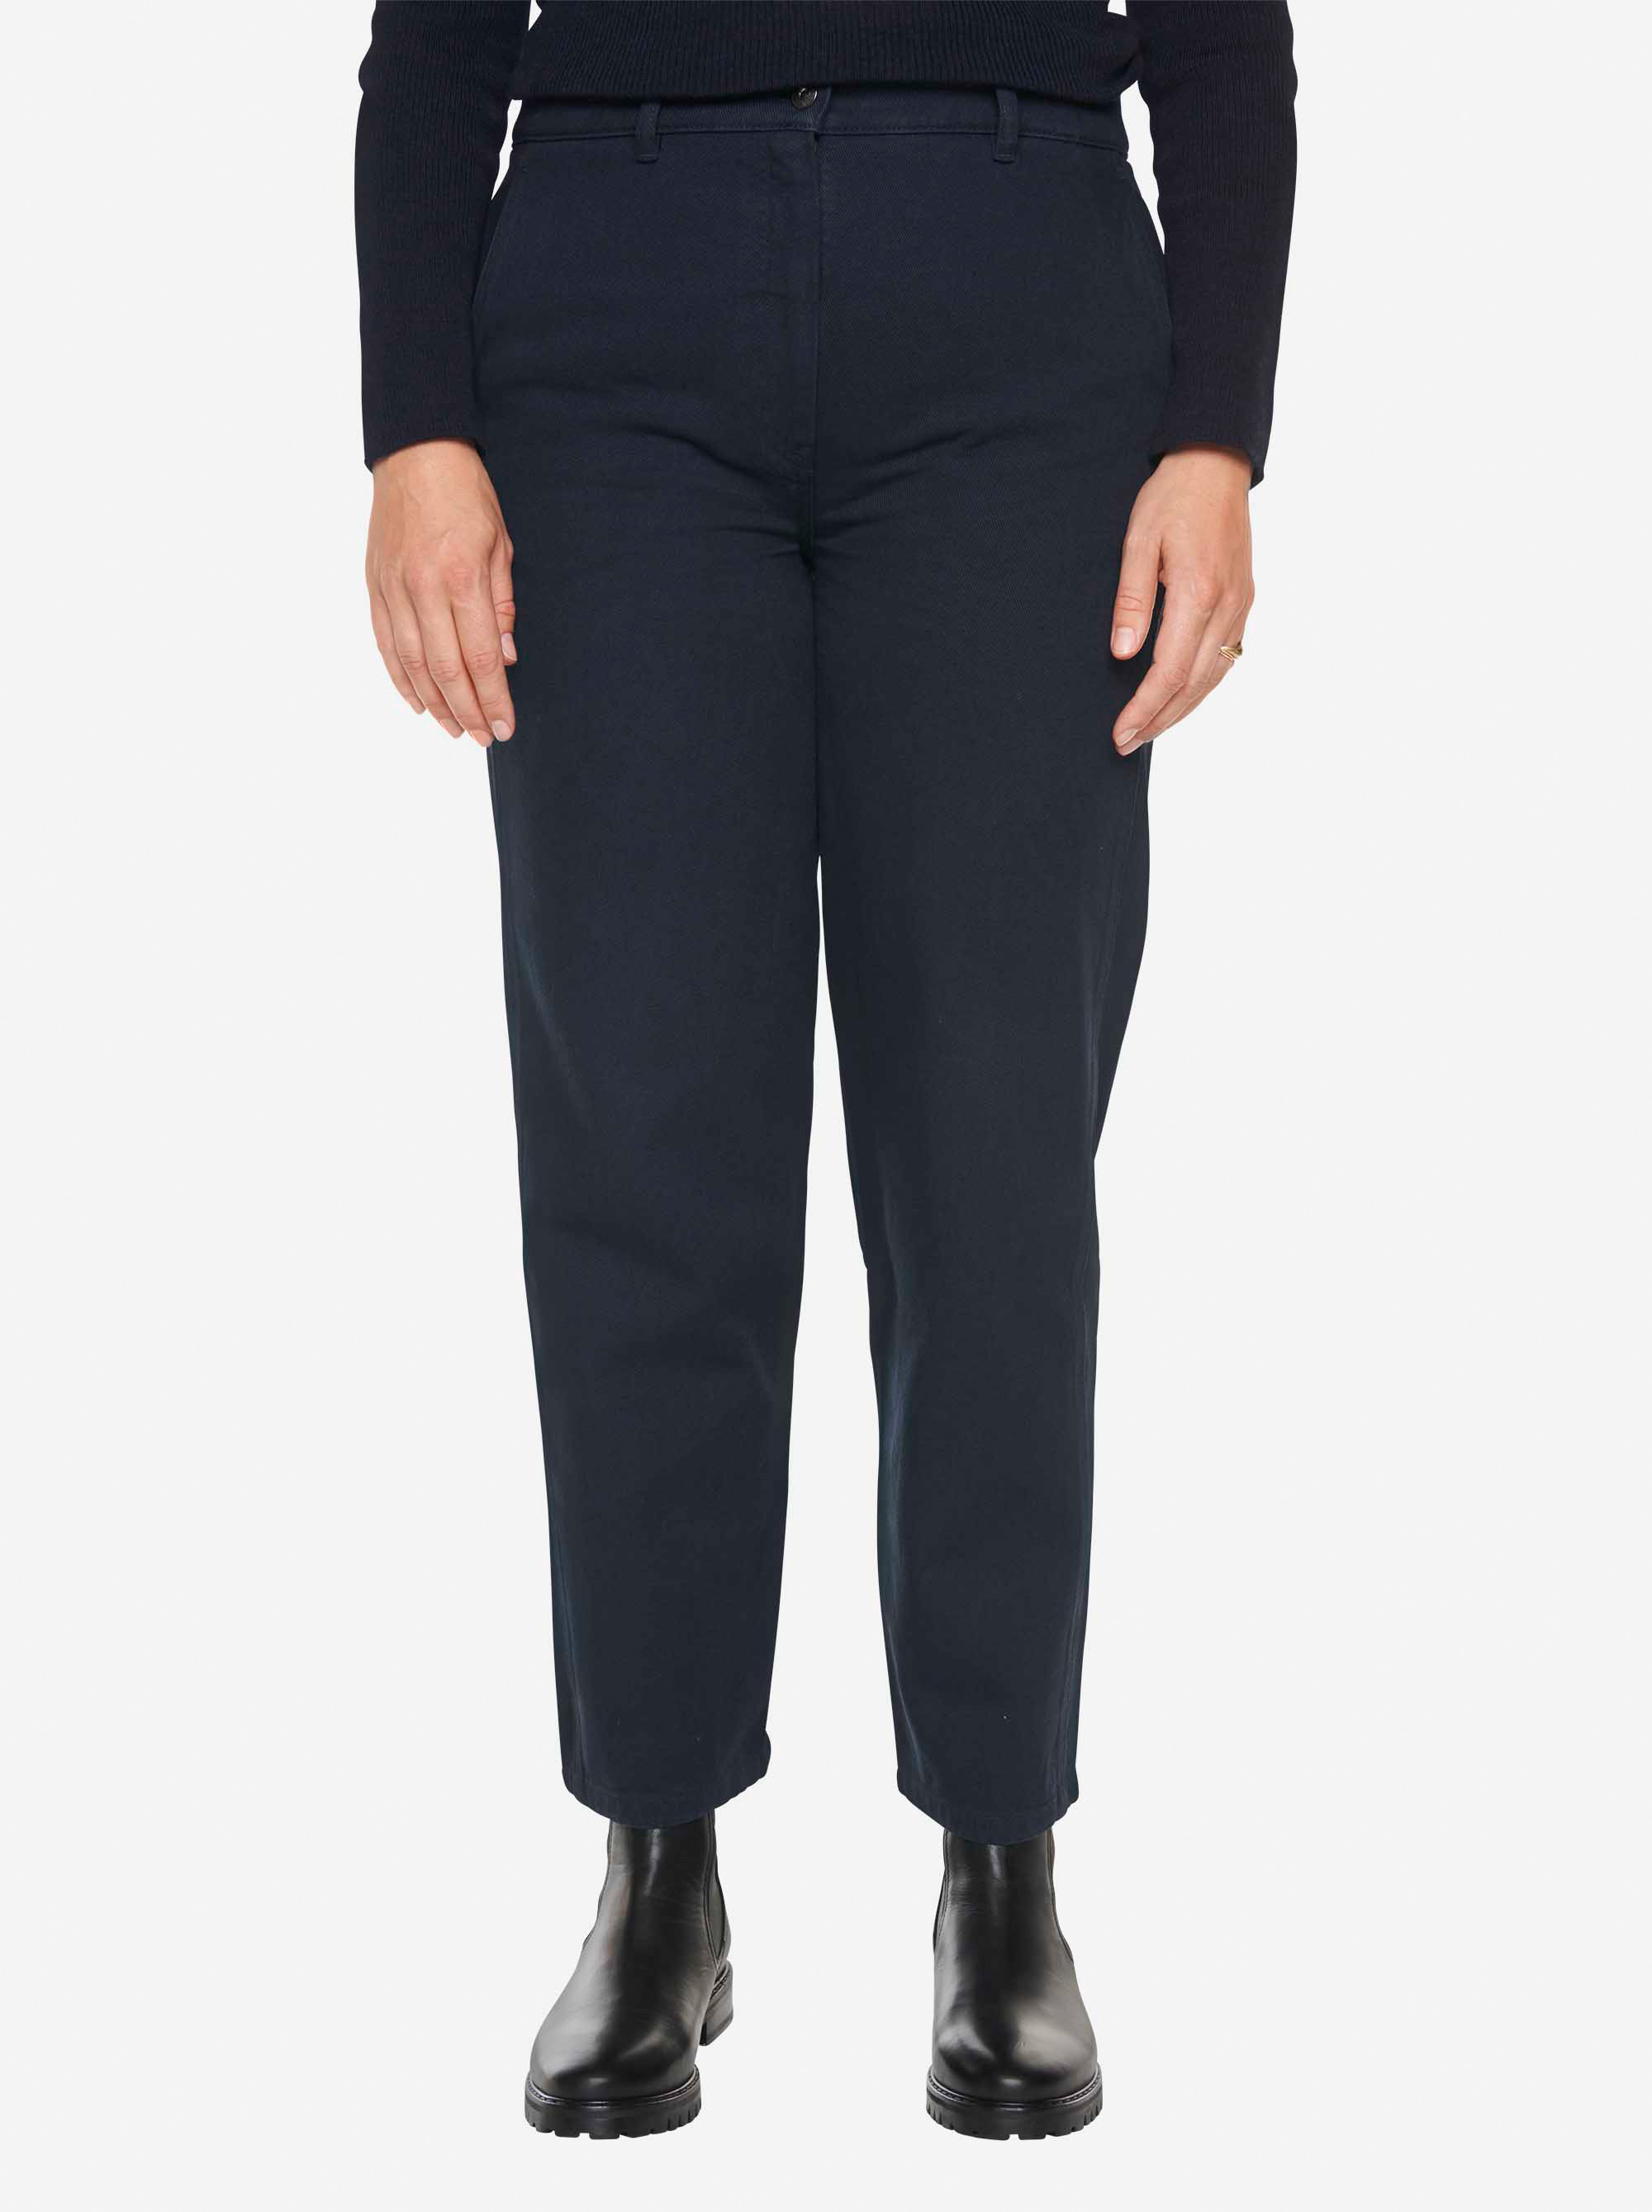 Teym - The Everyday Pant - Women - Sizeguide - 2